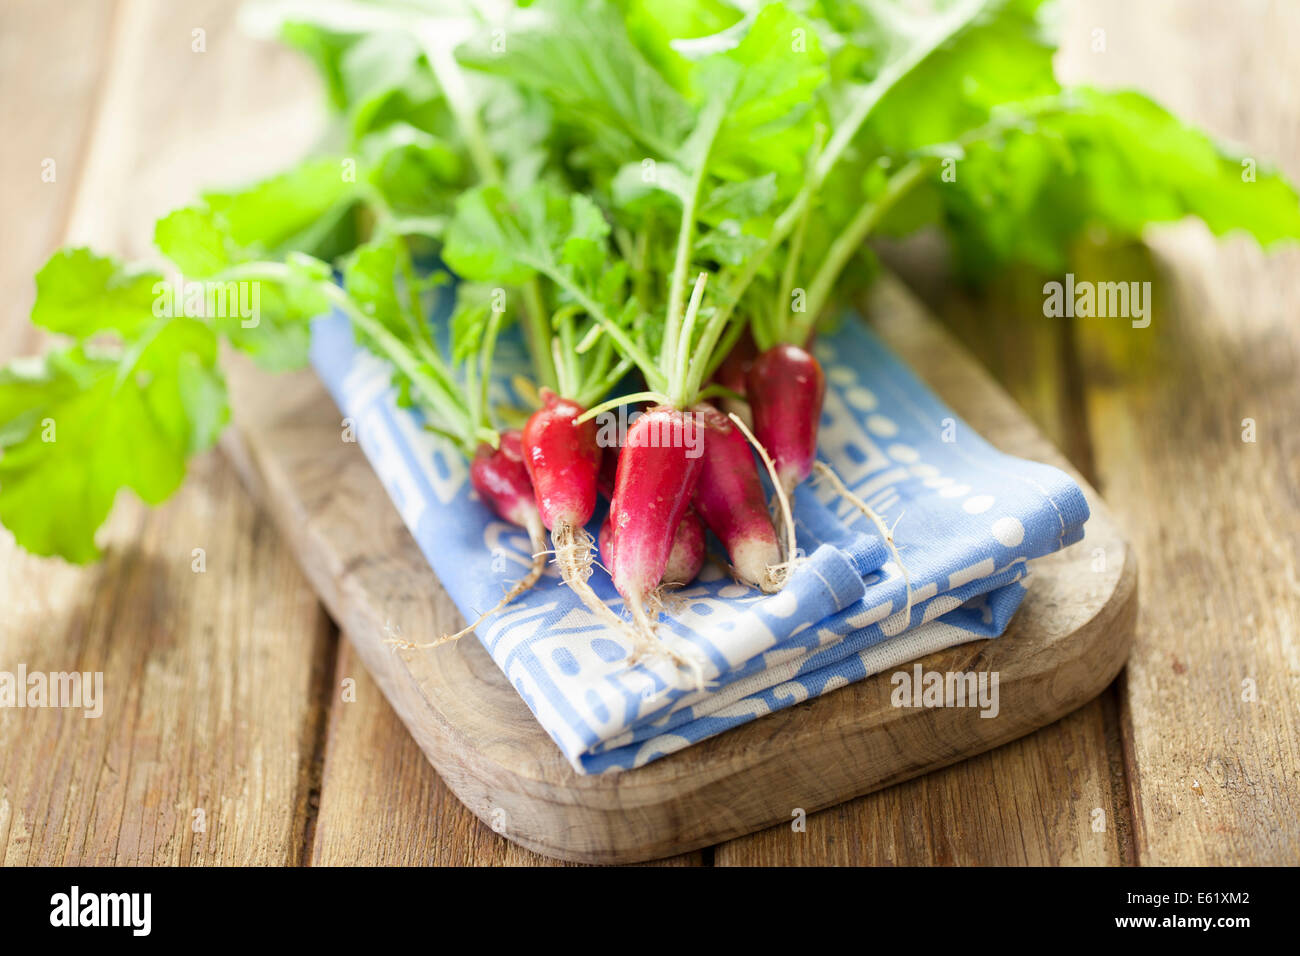 French Breakfast Radishes on Board Stock Photo